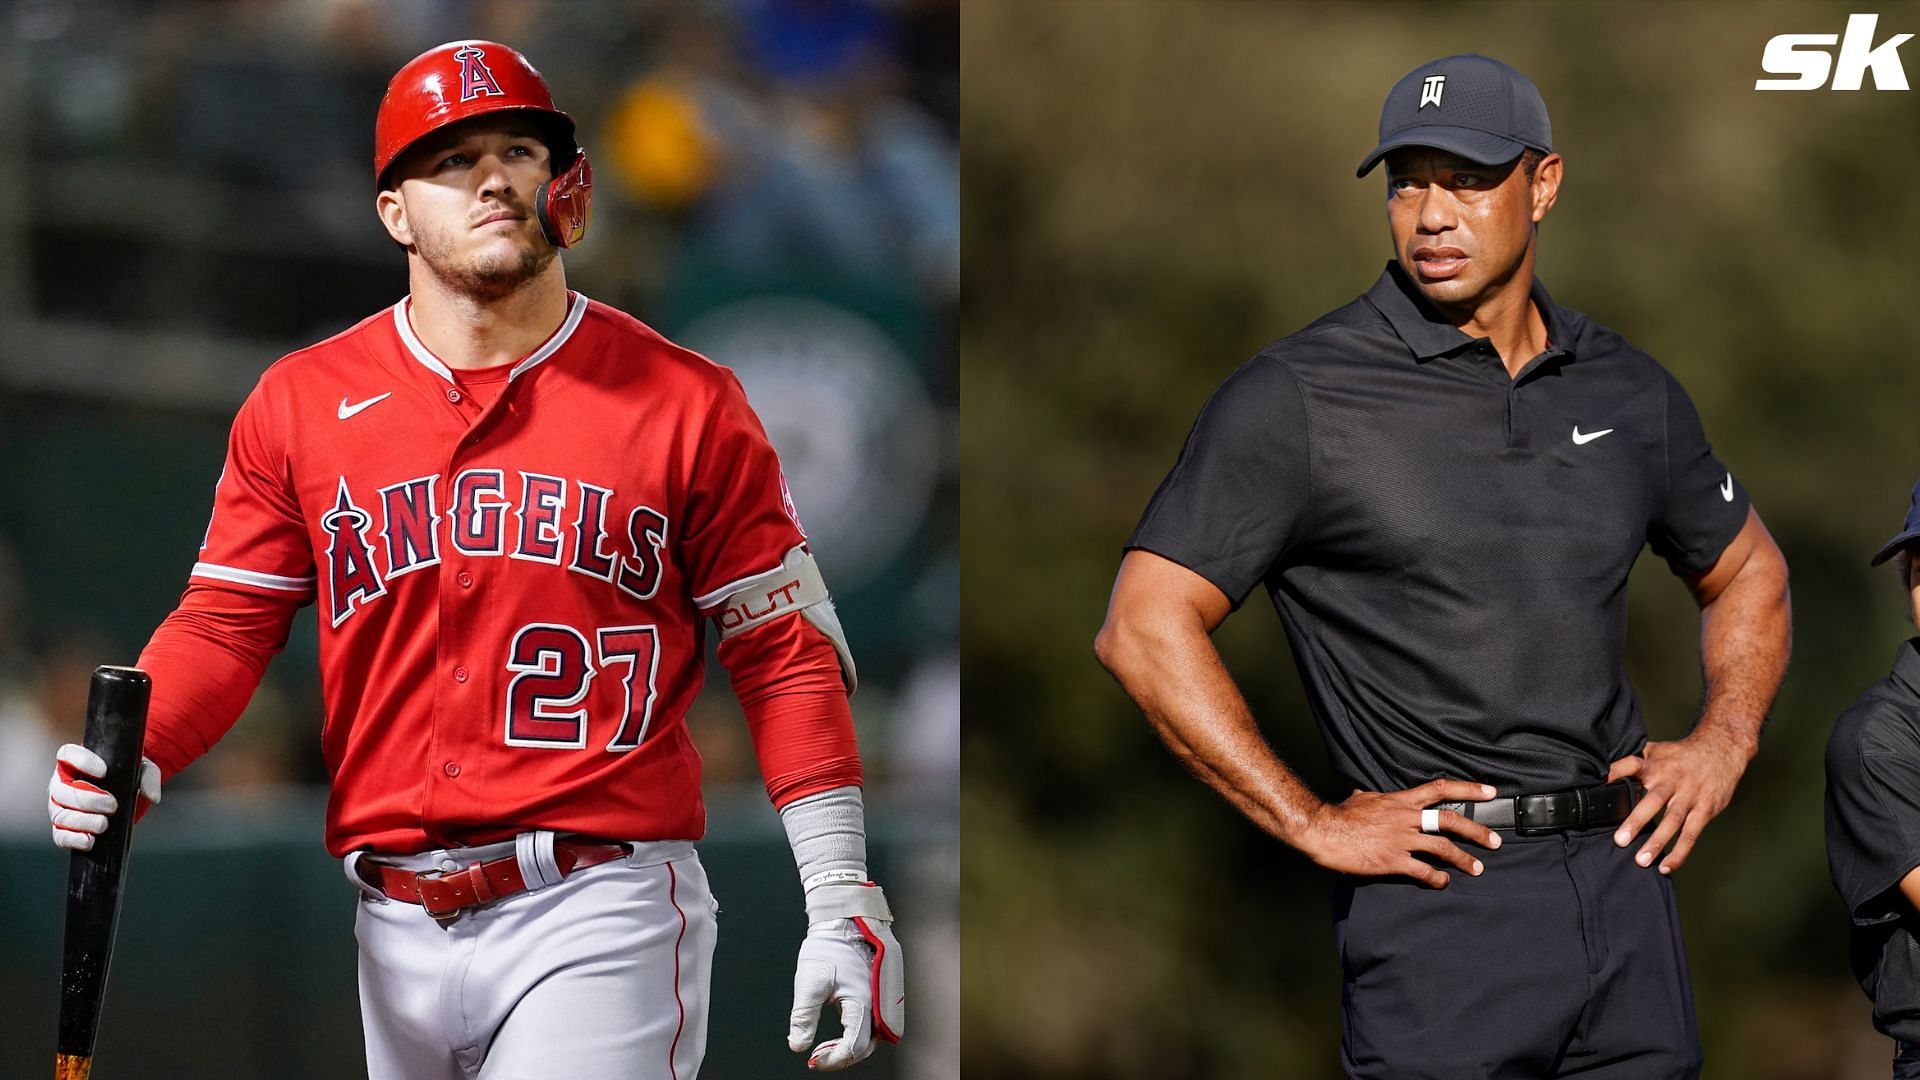 Vineland NJ: Mike Trout, Tiger Woods creating championship golf course